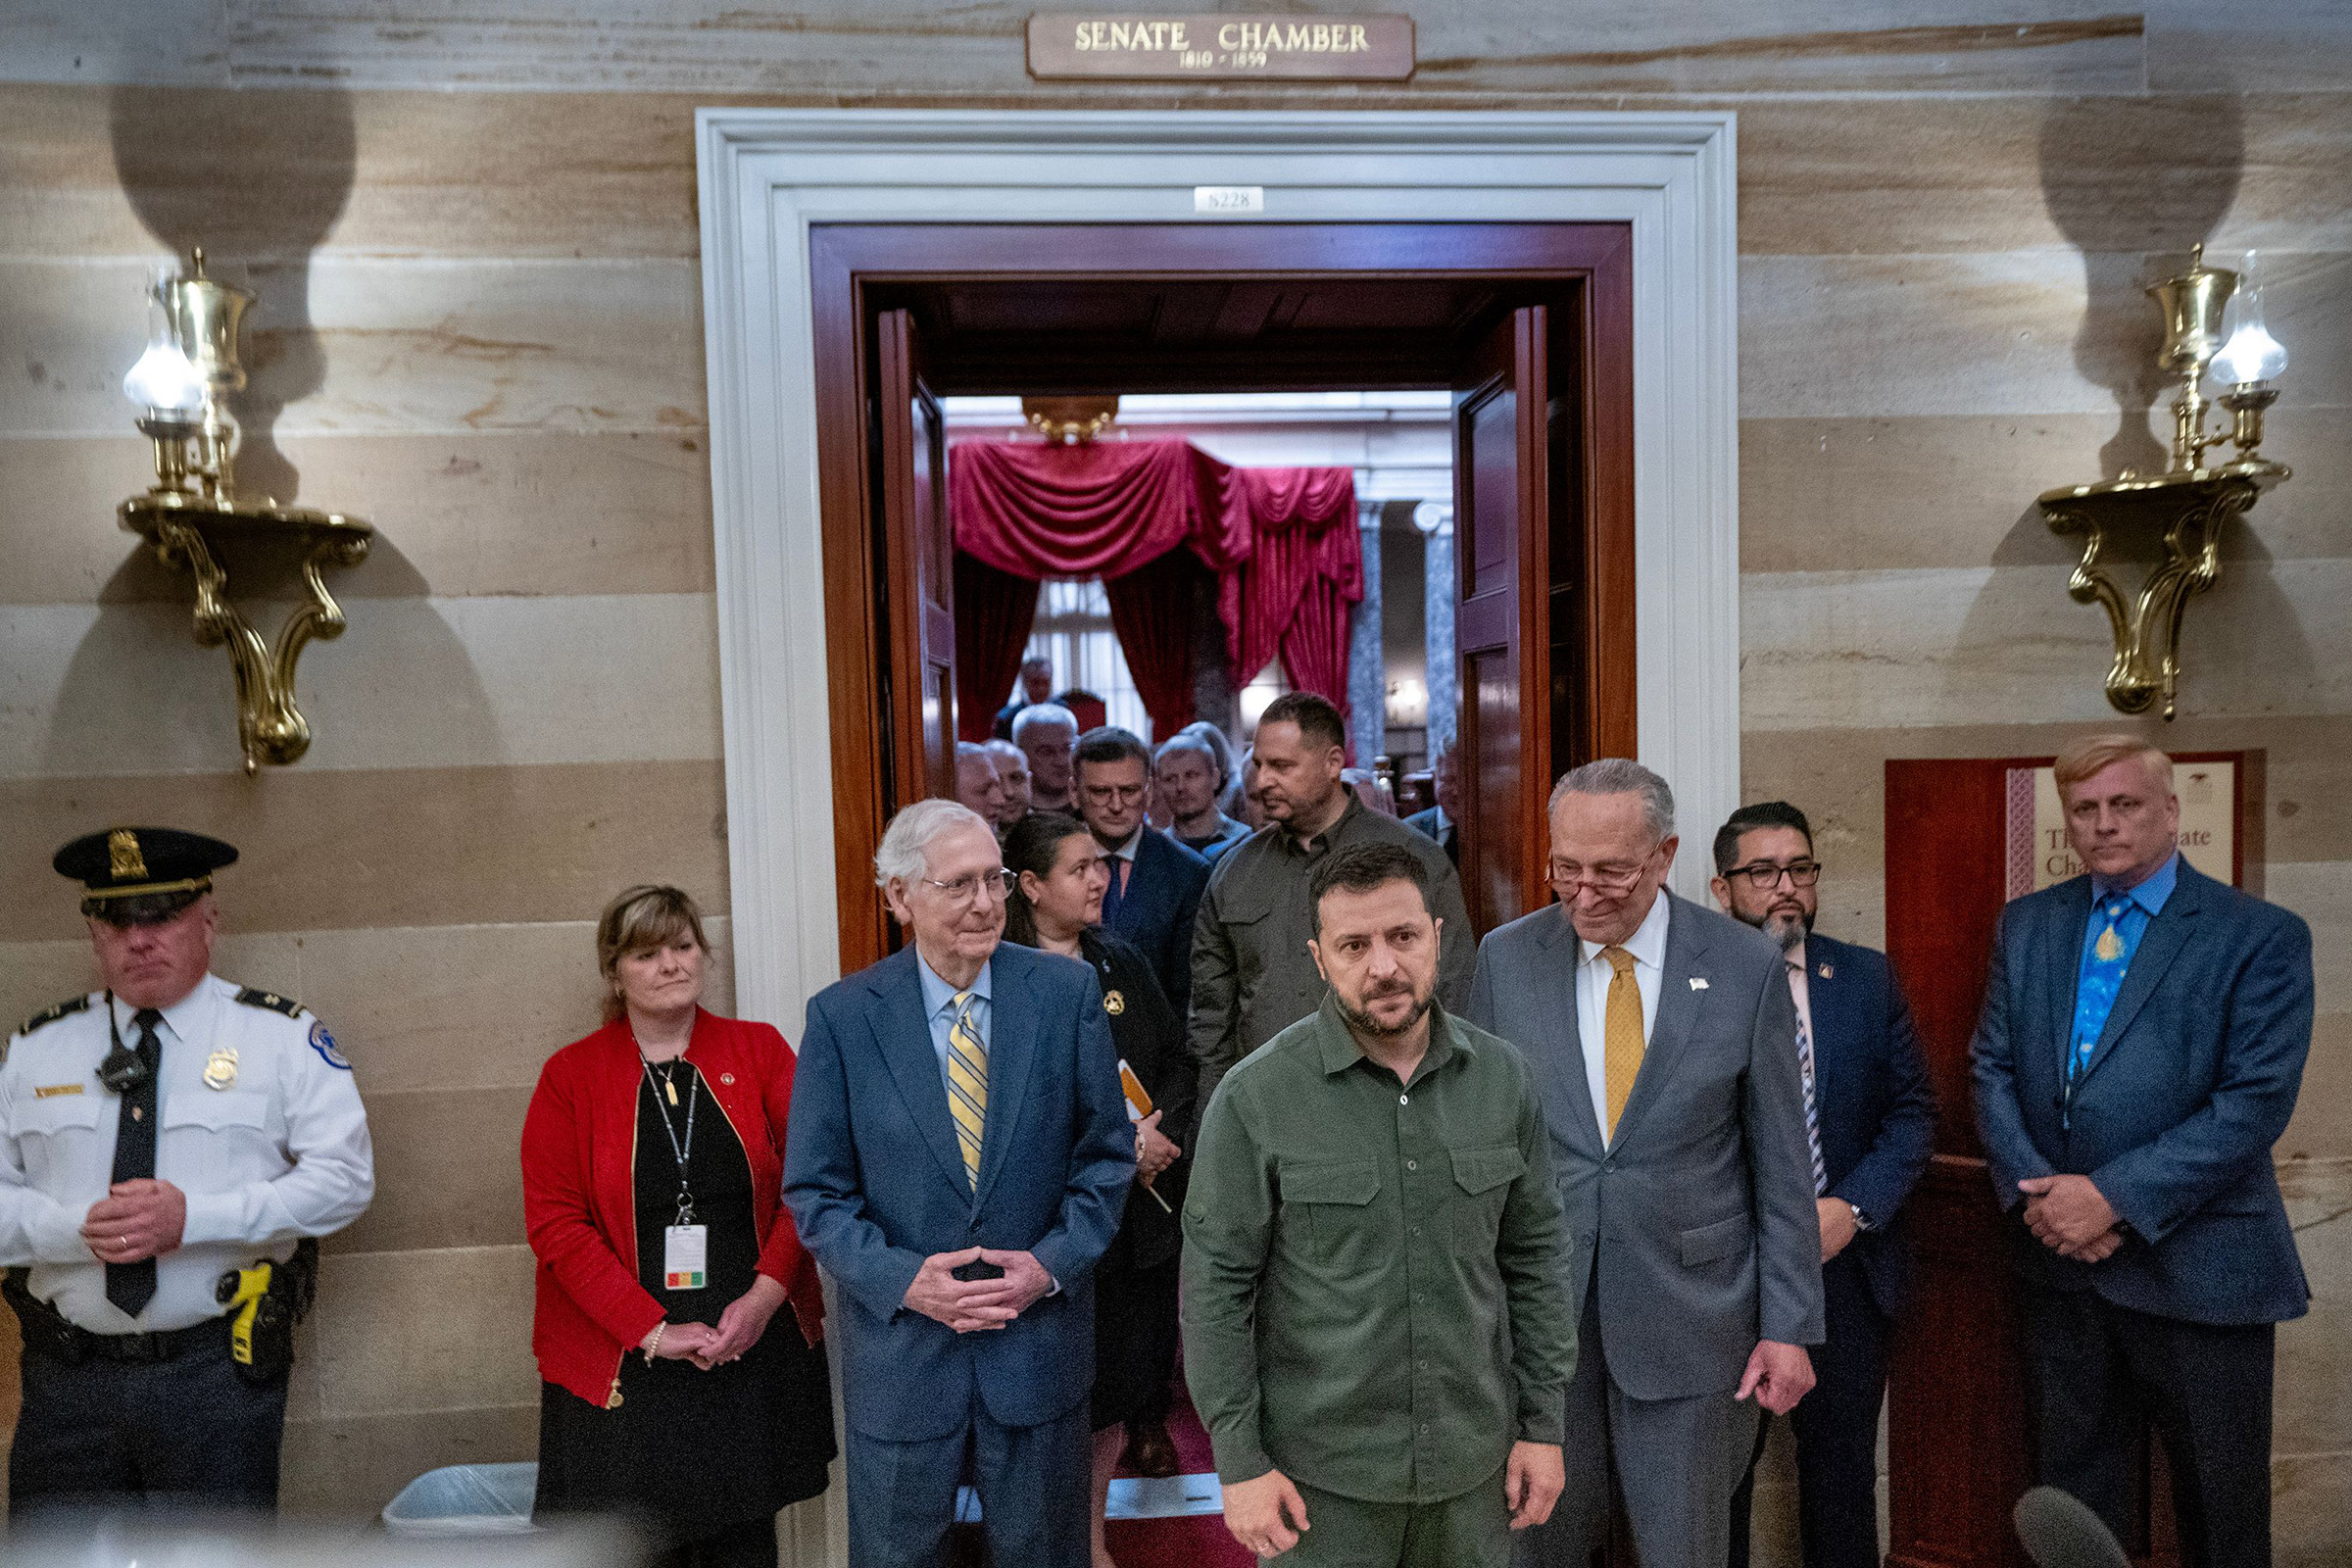 Zelensky leaves a contentious meeting with U.S. Senators in the Capitol on Sept. 21.